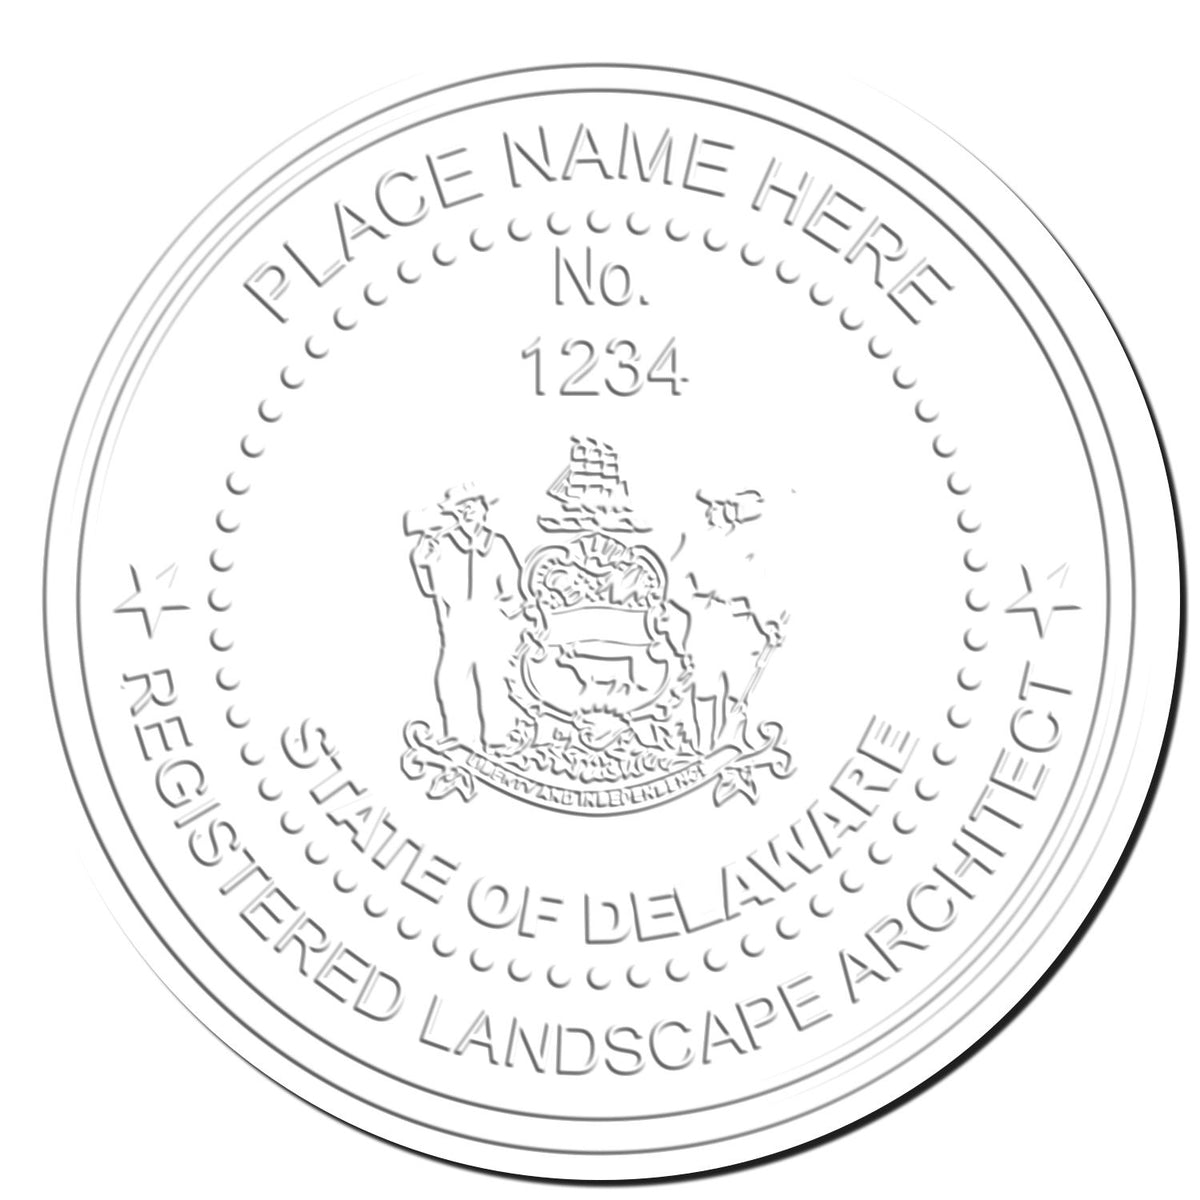 This paper is stamped with a sample imprint of the Hybrid Delaware Landscape Architect Seal, signifying its quality and reliability.